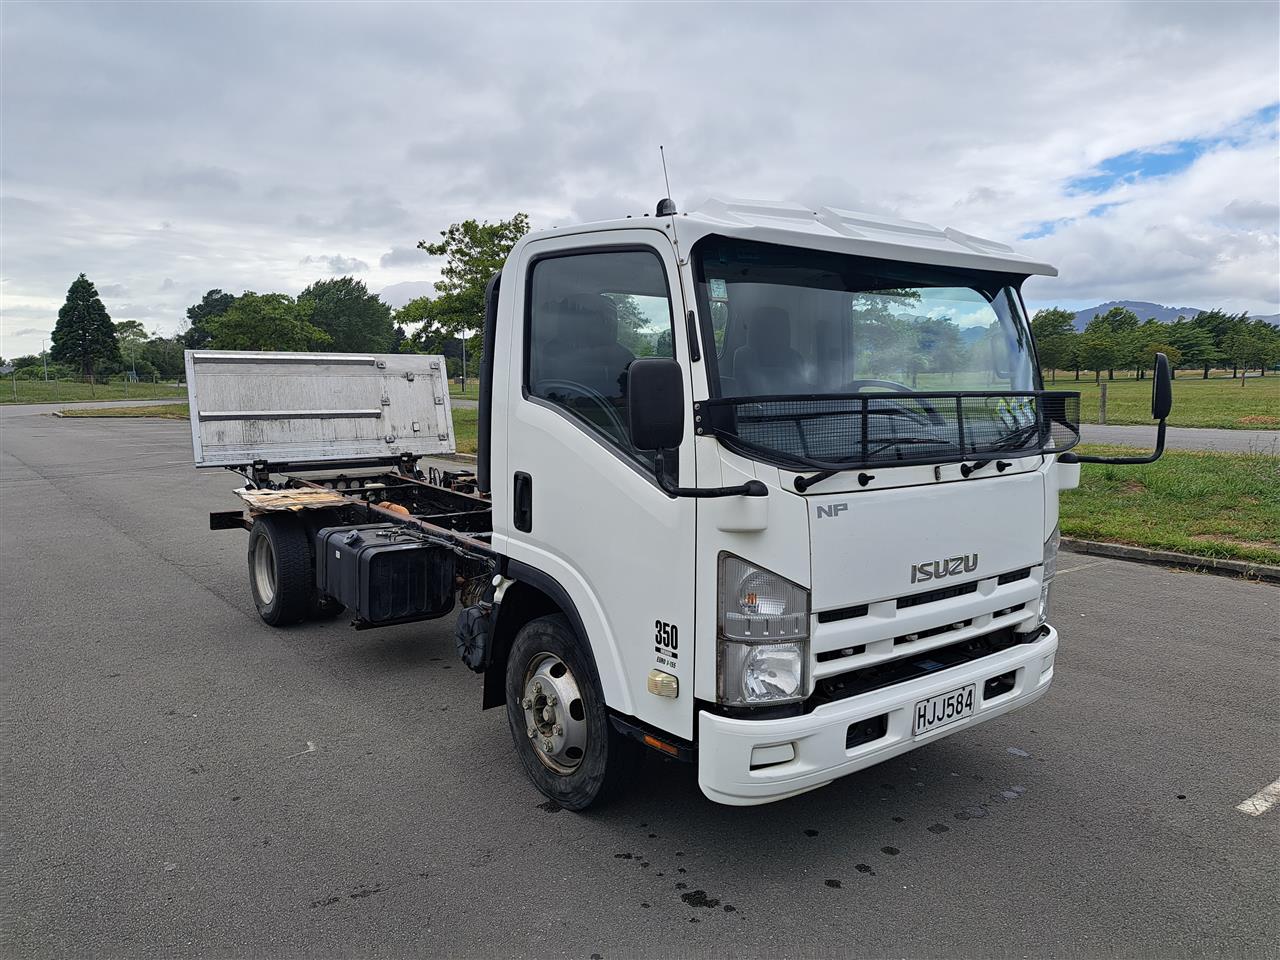 2014 Isuzu N SERIES - 4x2 Cab Chassis and Tail Lift